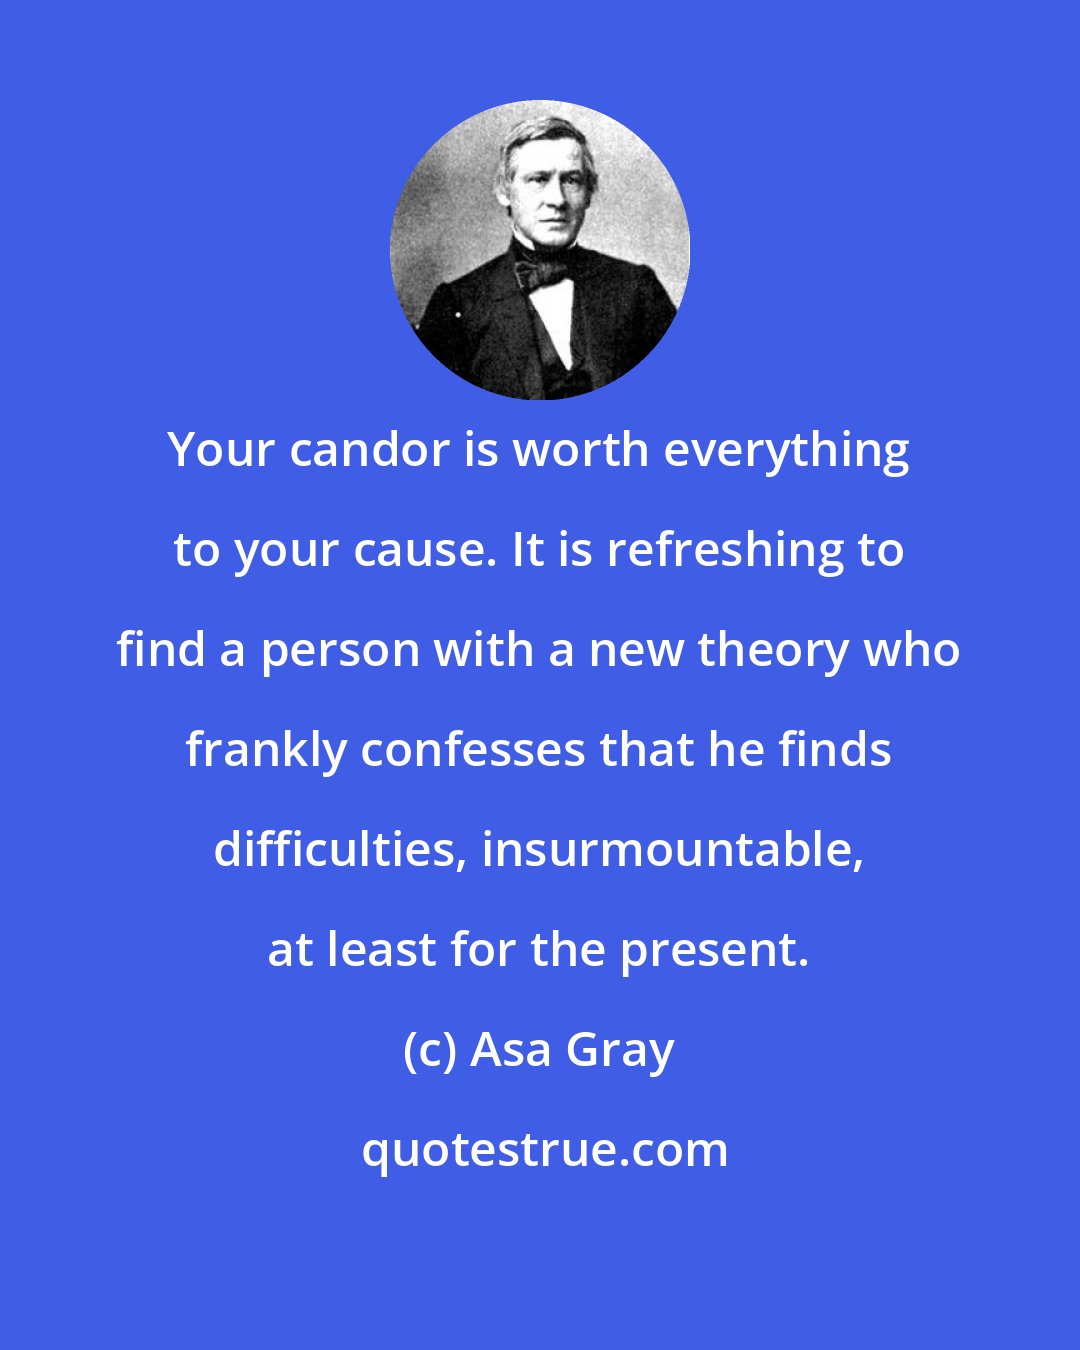 Asa Gray: Your candor is worth everything to your cause. It is refreshing to find a person with a new theory who frankly confesses that he finds difficulties, insurmountable, at least for the present.